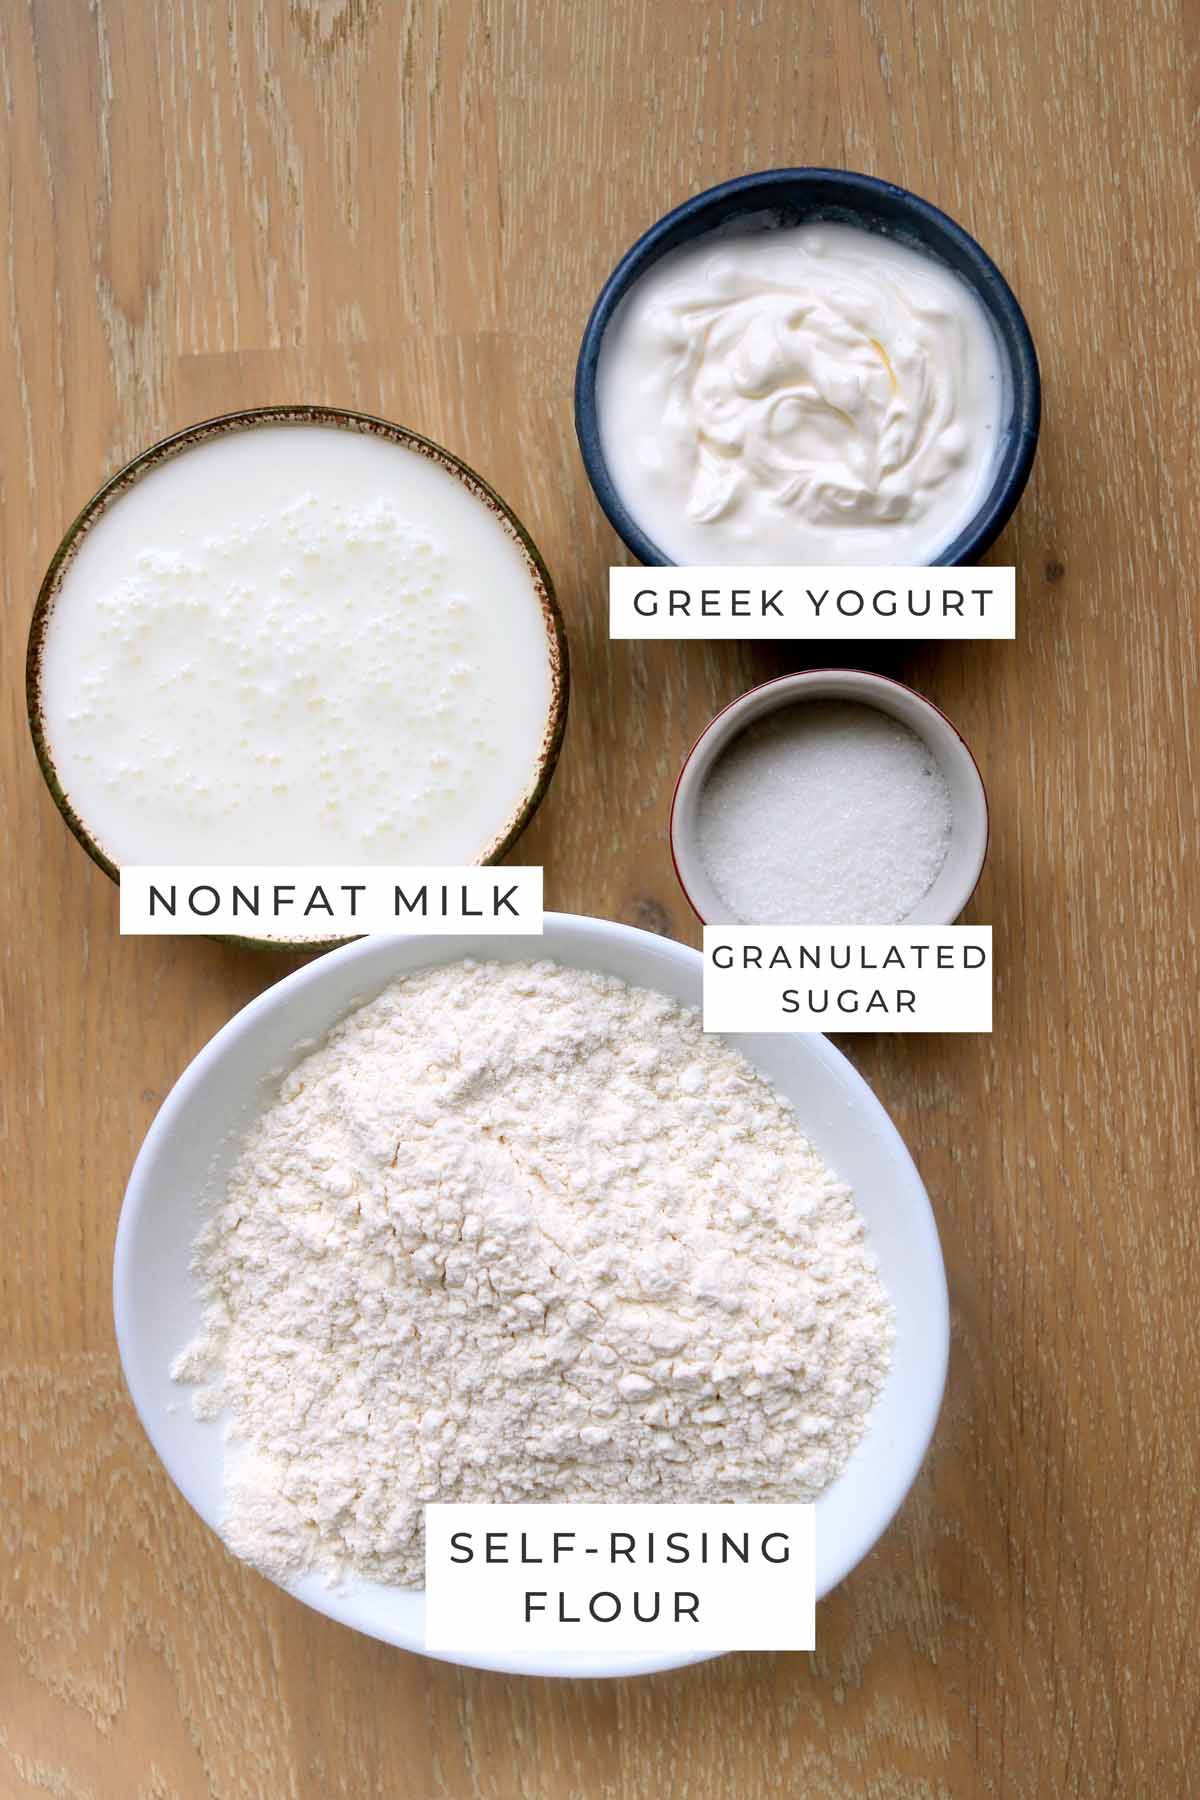 Labeled ingredients for the biscuits.